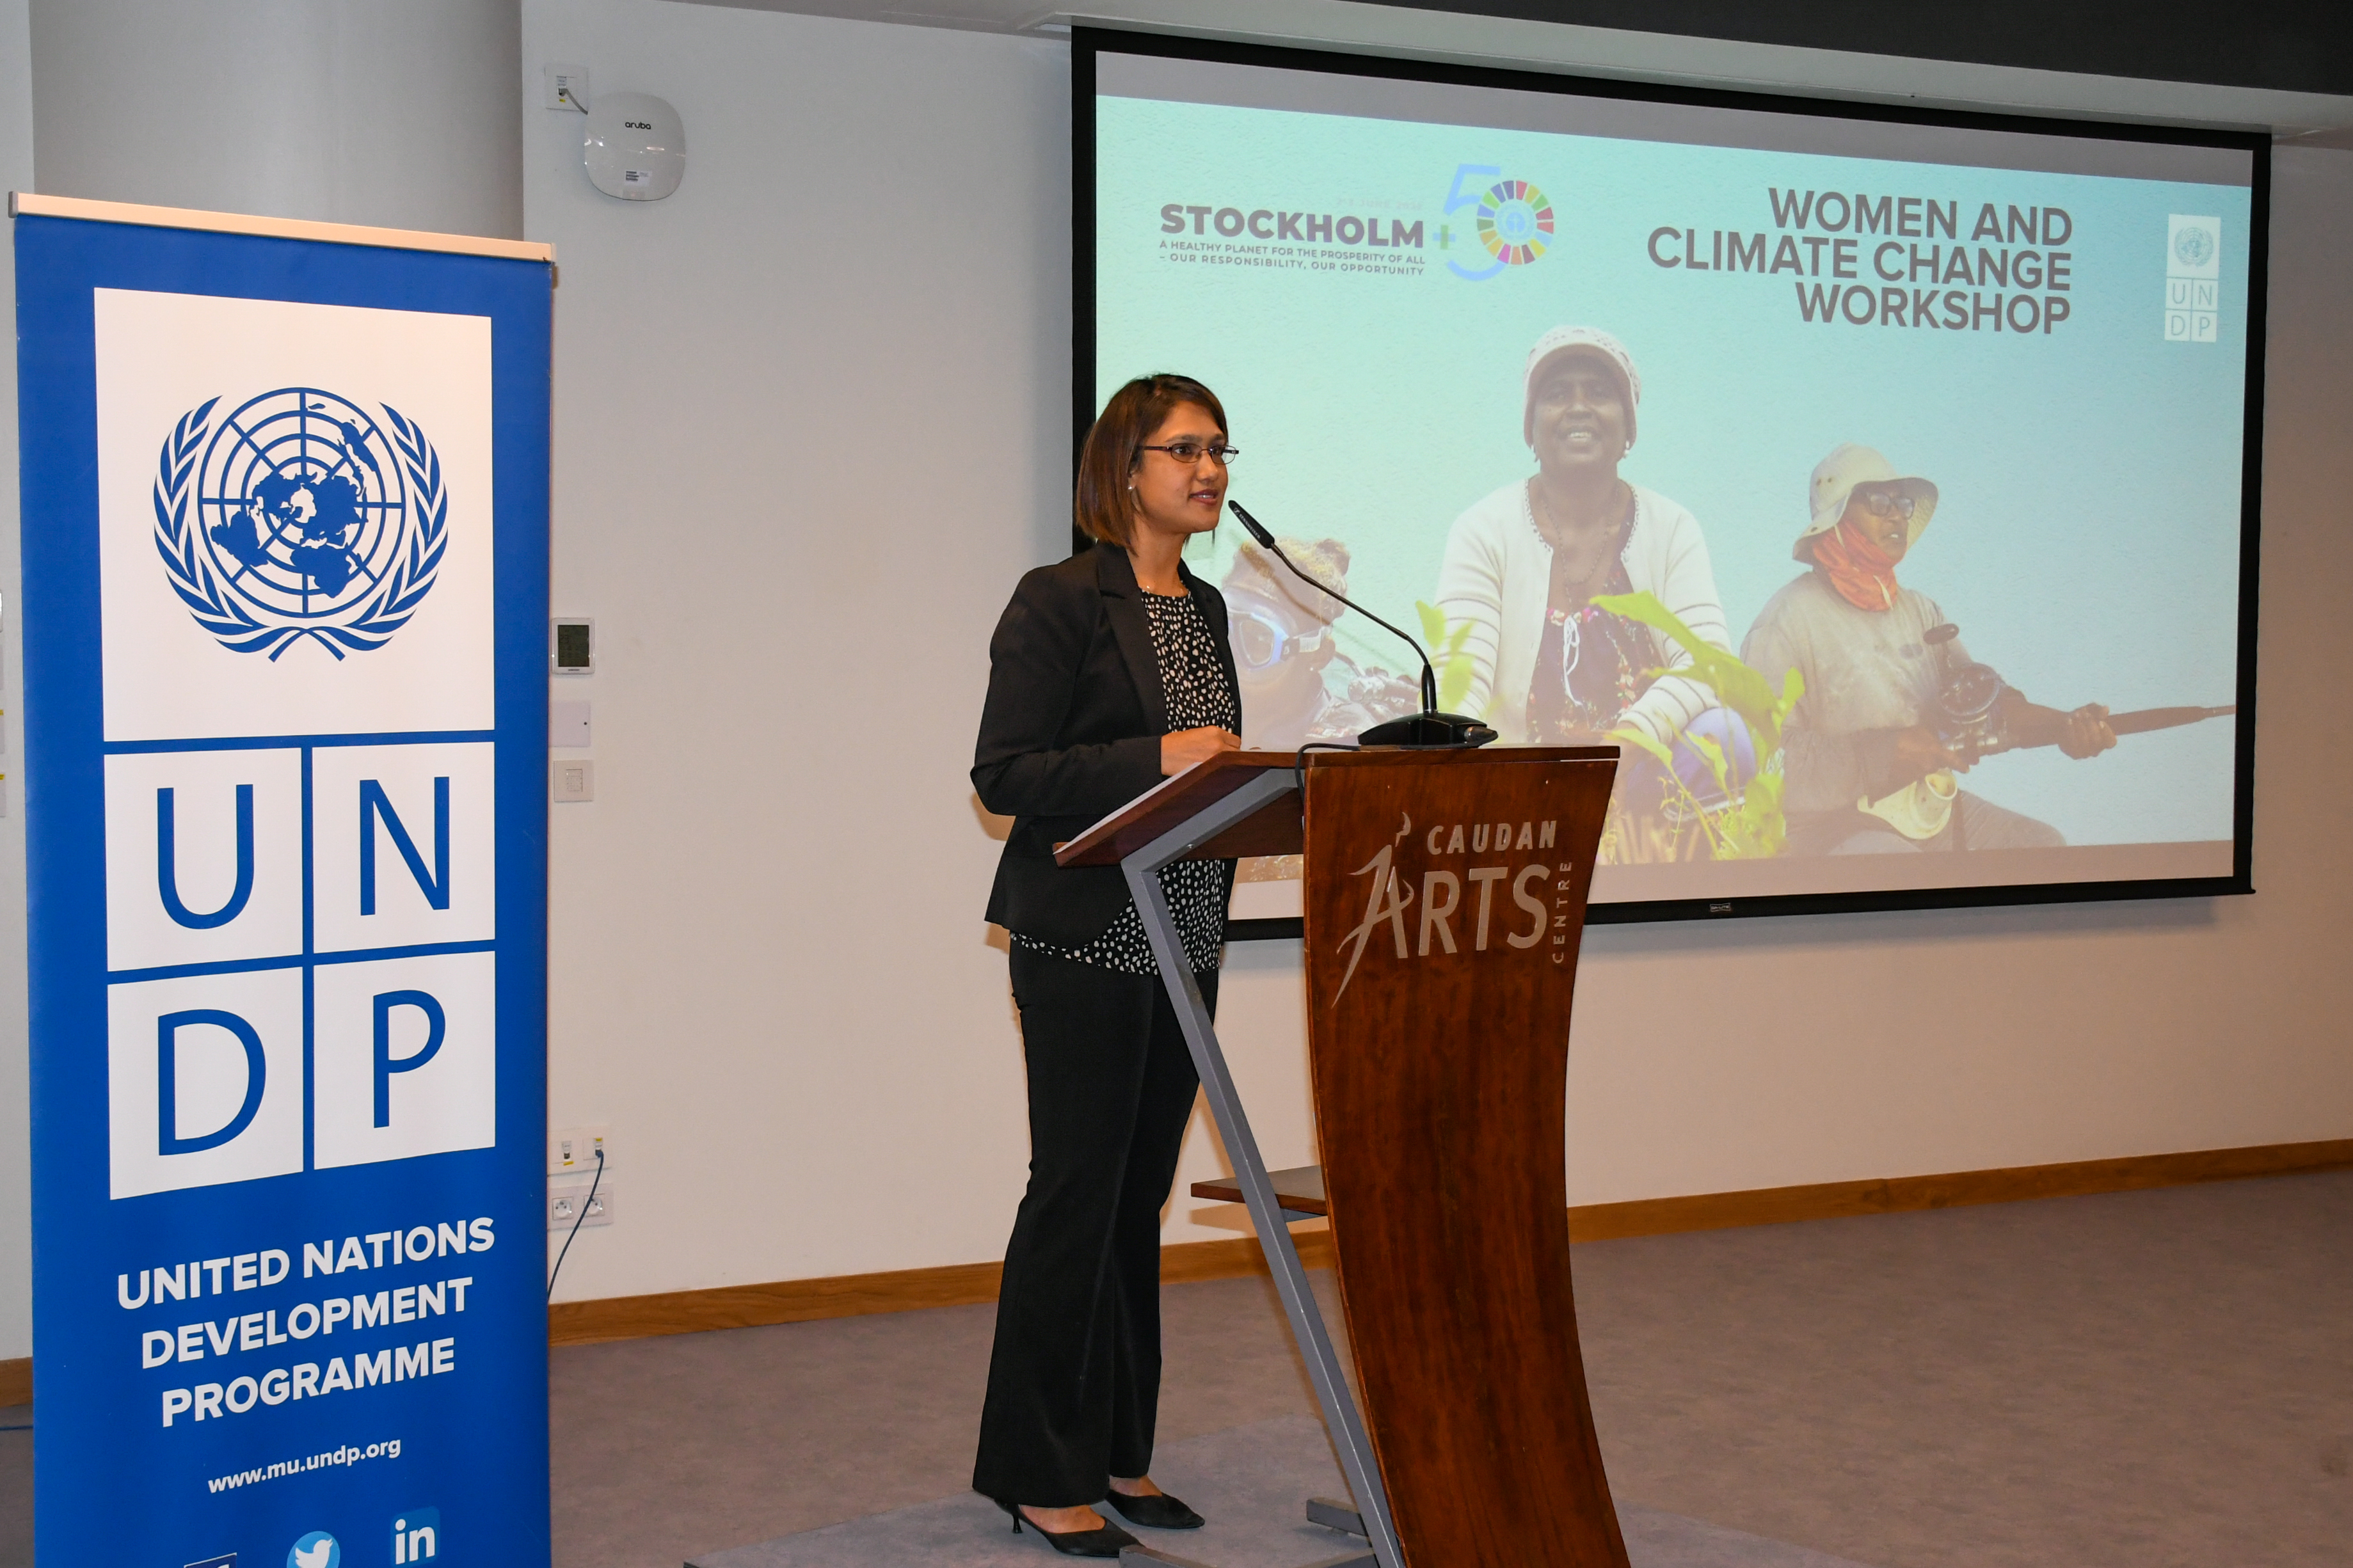 UNDP Women and Climate Change Workshop